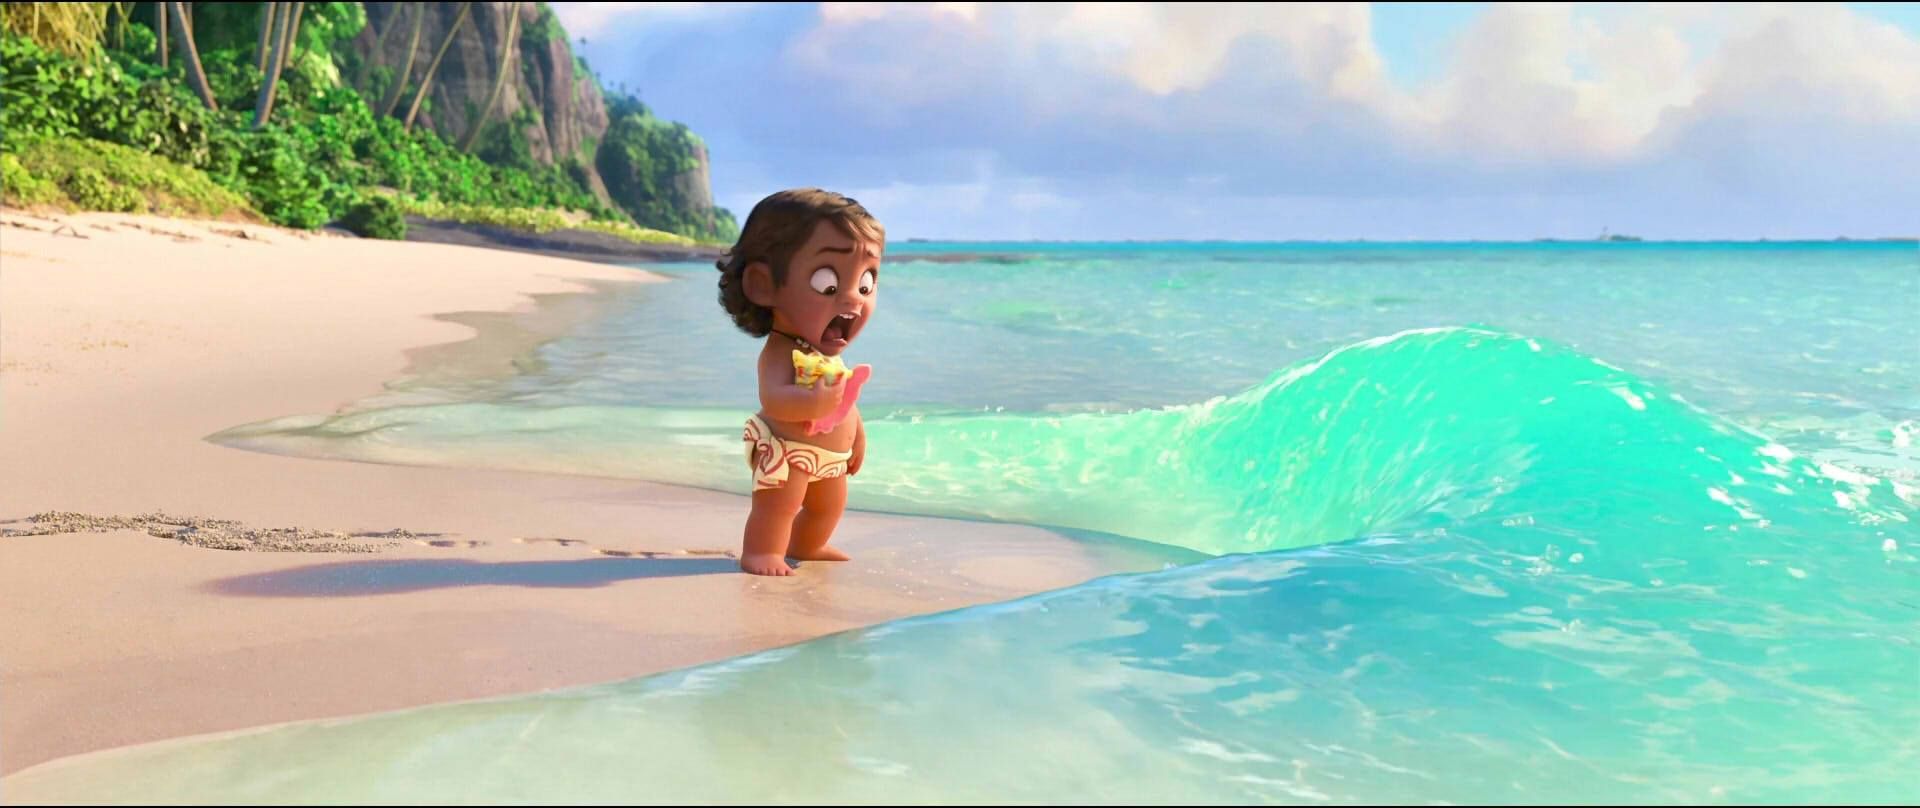 A Friend Did This Edit Of Baby Moana When She Saw Her - Wreck It Ralph 2 Baby Moana , HD Wallpaper & Backgrounds